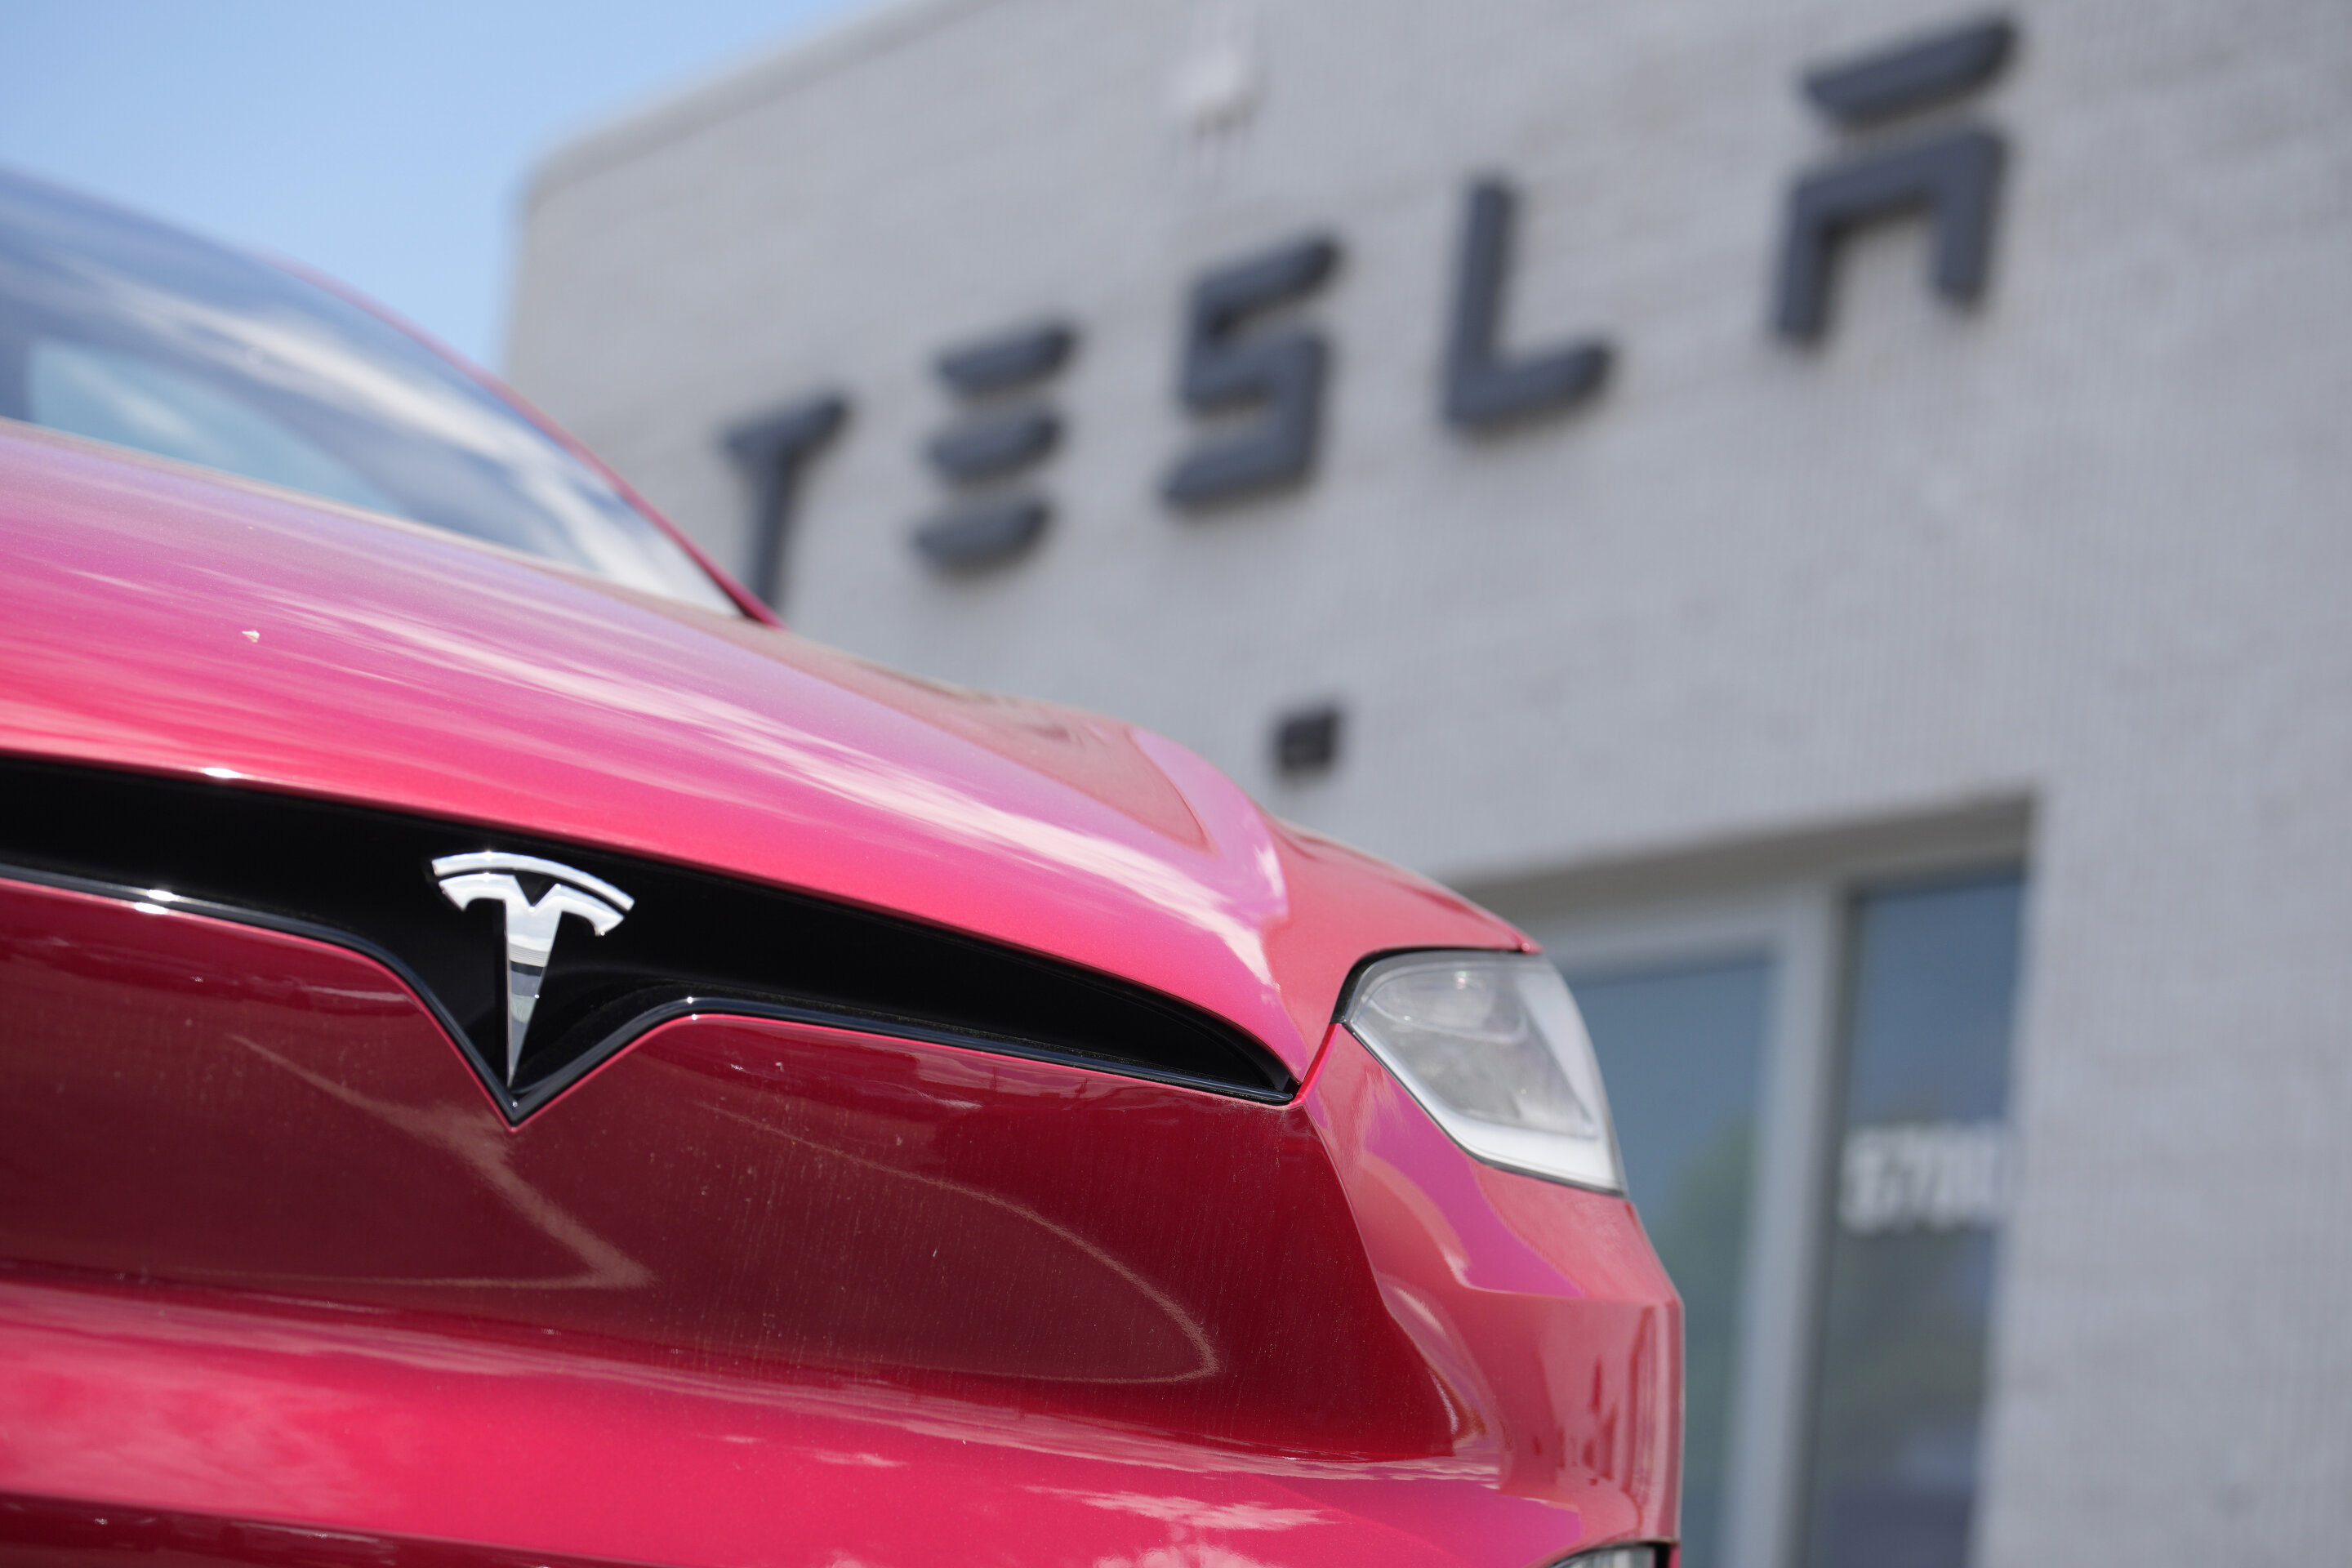 Tesla’s Q2 income jumps 20%, although shares stayed flat amid concerns about profits